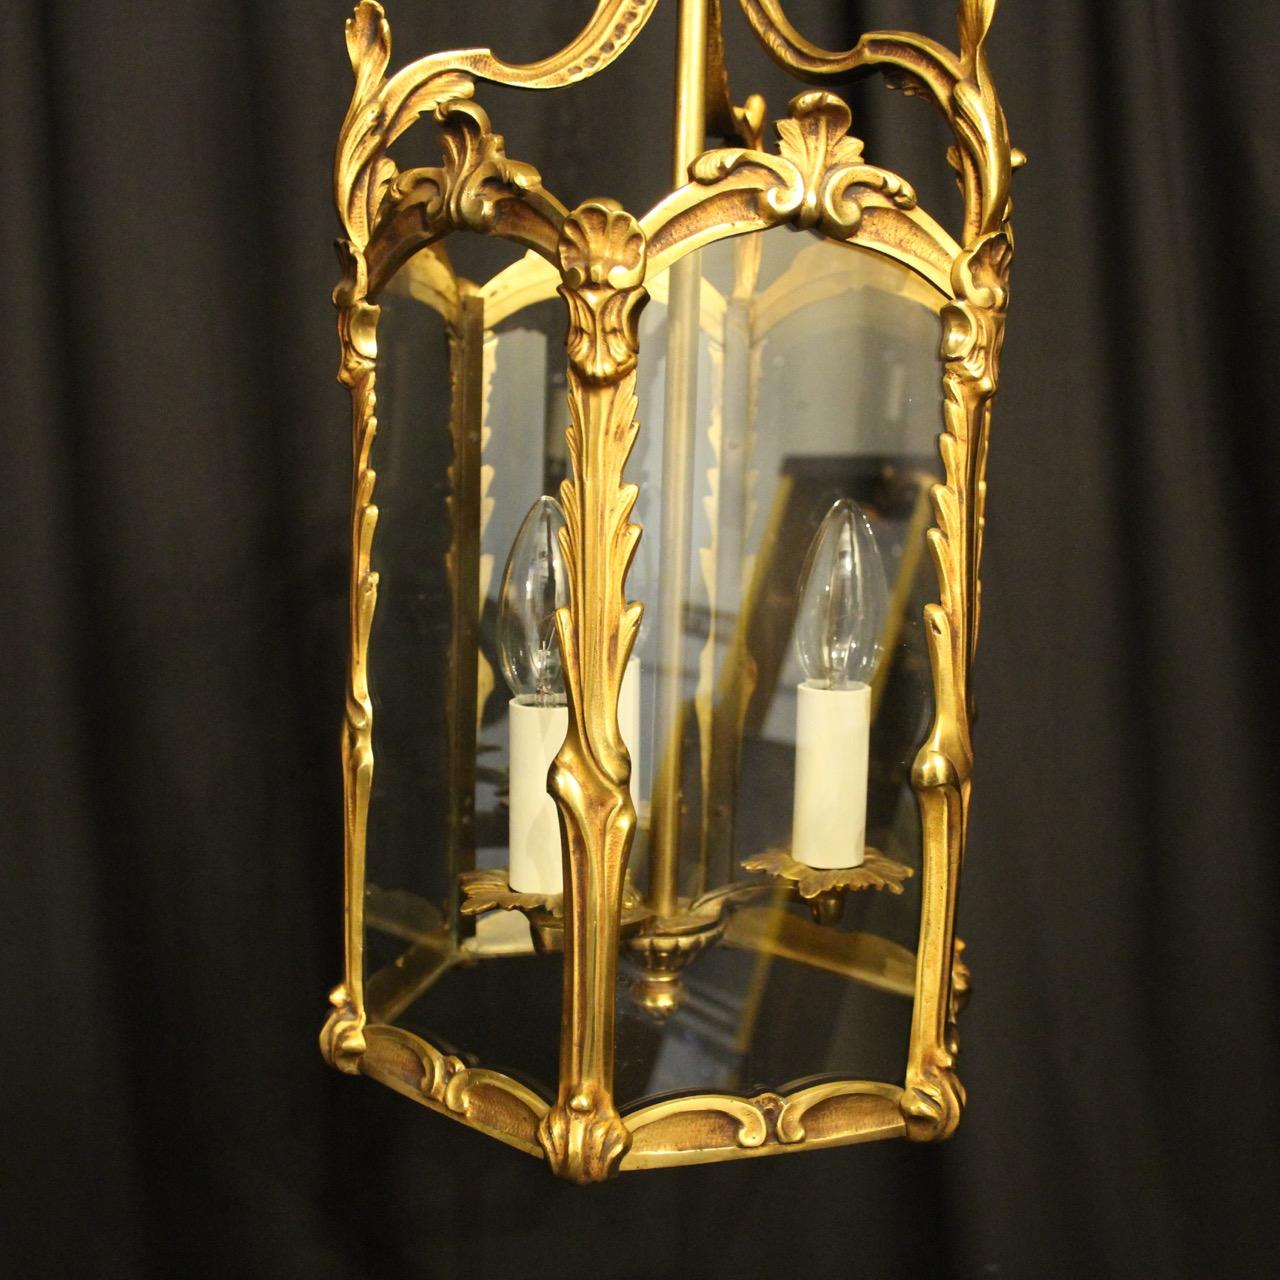 A French gilded bronze triple light hexagonal antique hall lantern, the six glass panels held within an ornate scrolling framework with three light fittings and having decorative scrolled central cartouche leaf embellishments, with leaf side panels